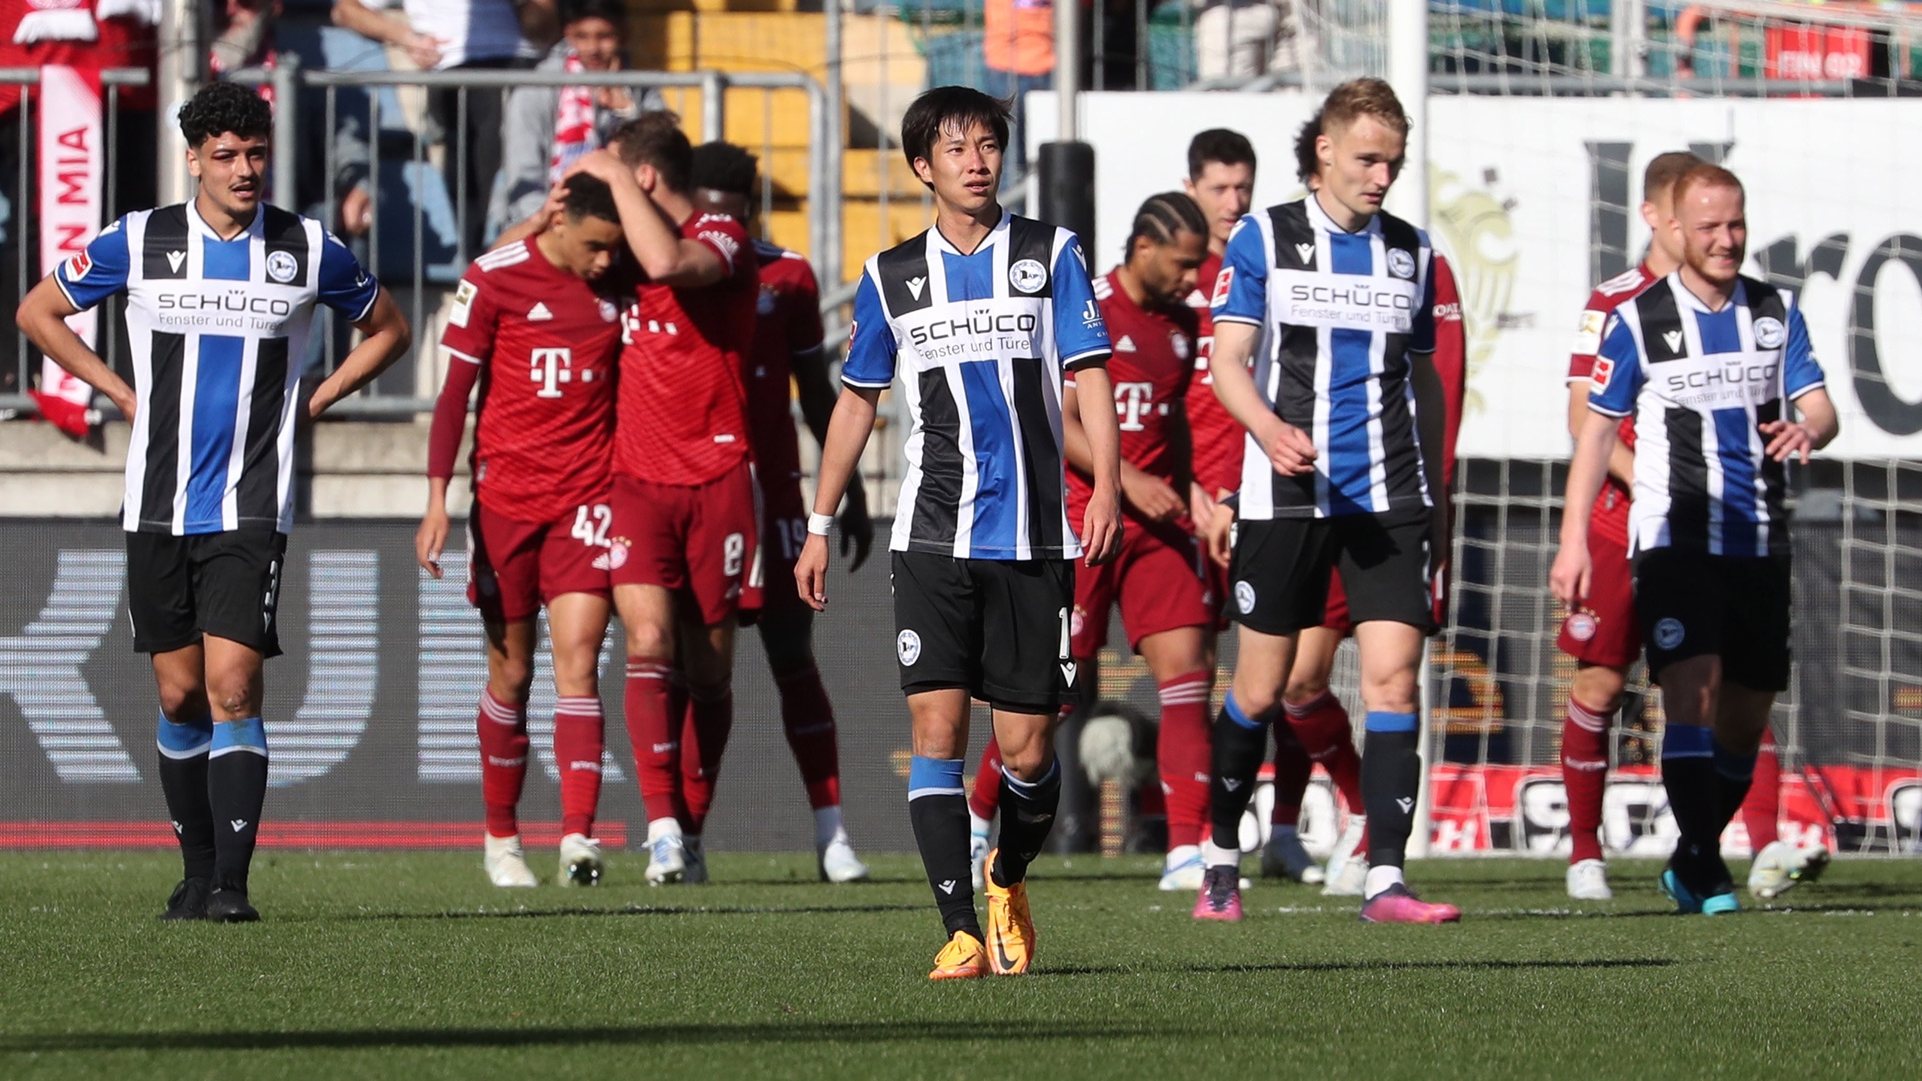 epa09894710 Players of both teams react after Bayern’s  3-0 goal during the German Bundesliga soccer match between DSC Arminia Bielefeld and FC Bayern Munich in Bielefeld,  Germany, 17 April 2022.  EPA/FOCKE STRANGMANN CONDITIONS - ATTENTION: The DFL regulations prohibit any use of photographs as image sequences and/or quasi-video.